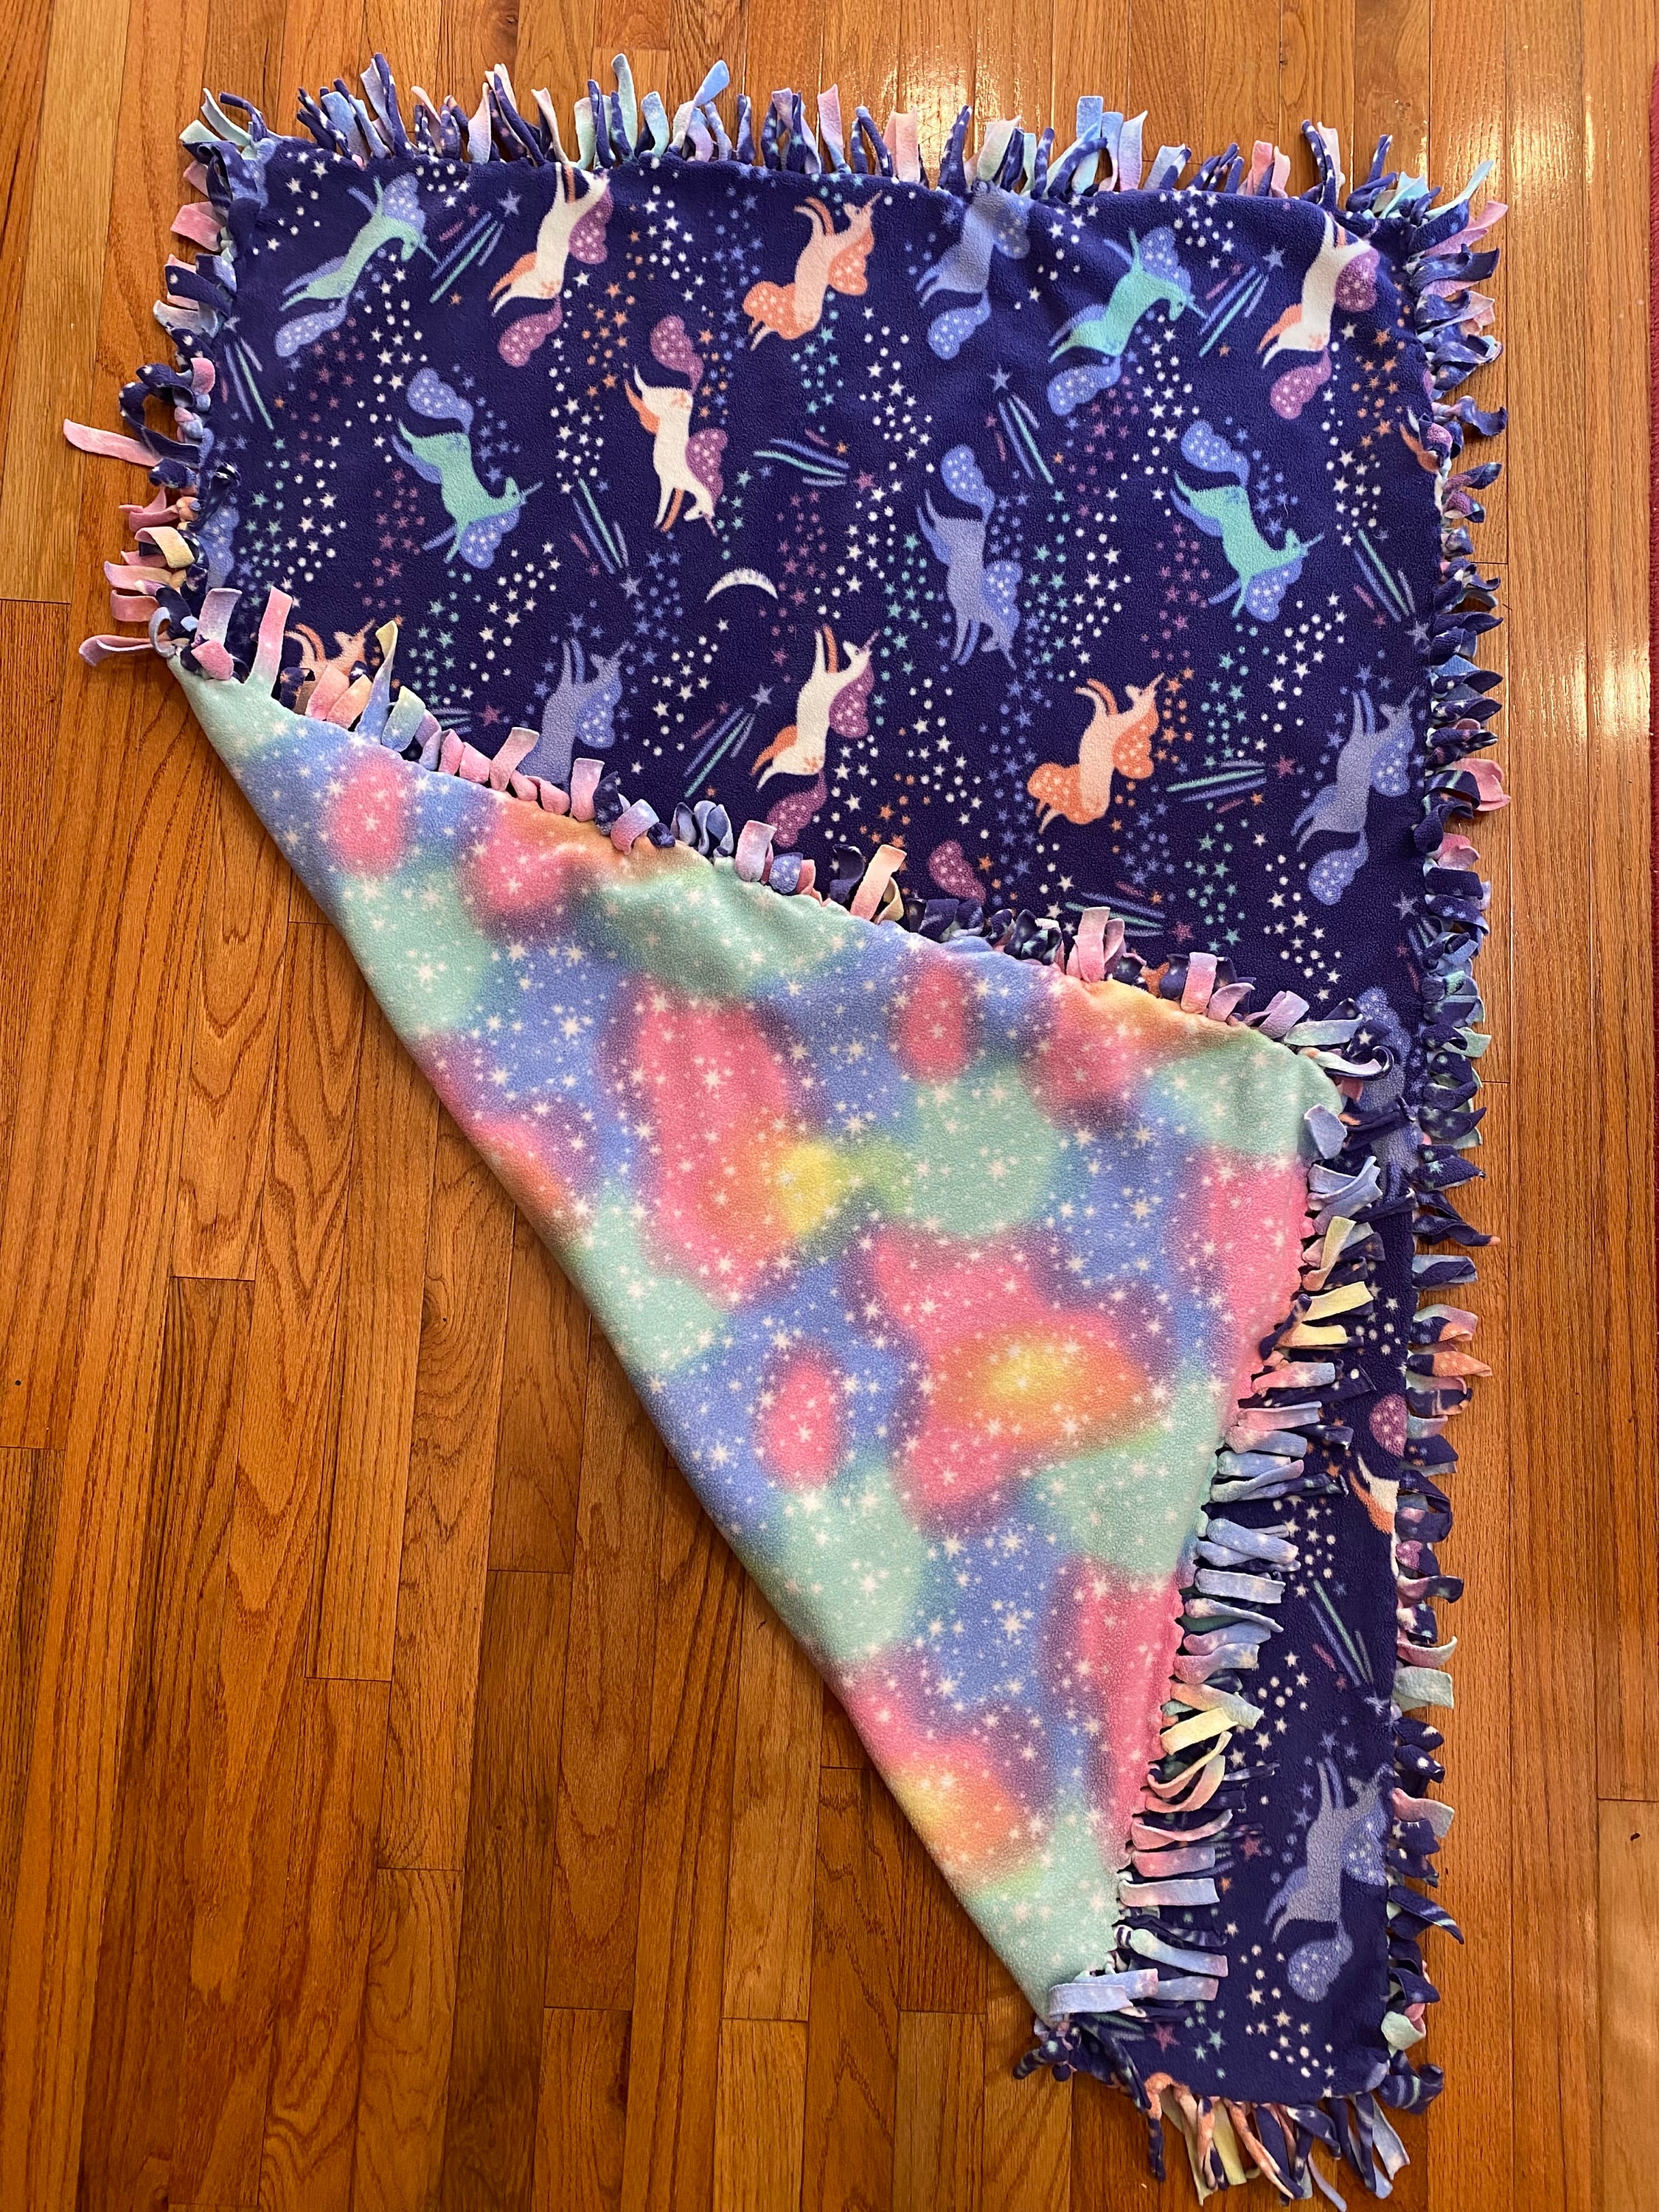 How to make a Fleece Tie Blanket - No Sew Project - The DIY Dreamer